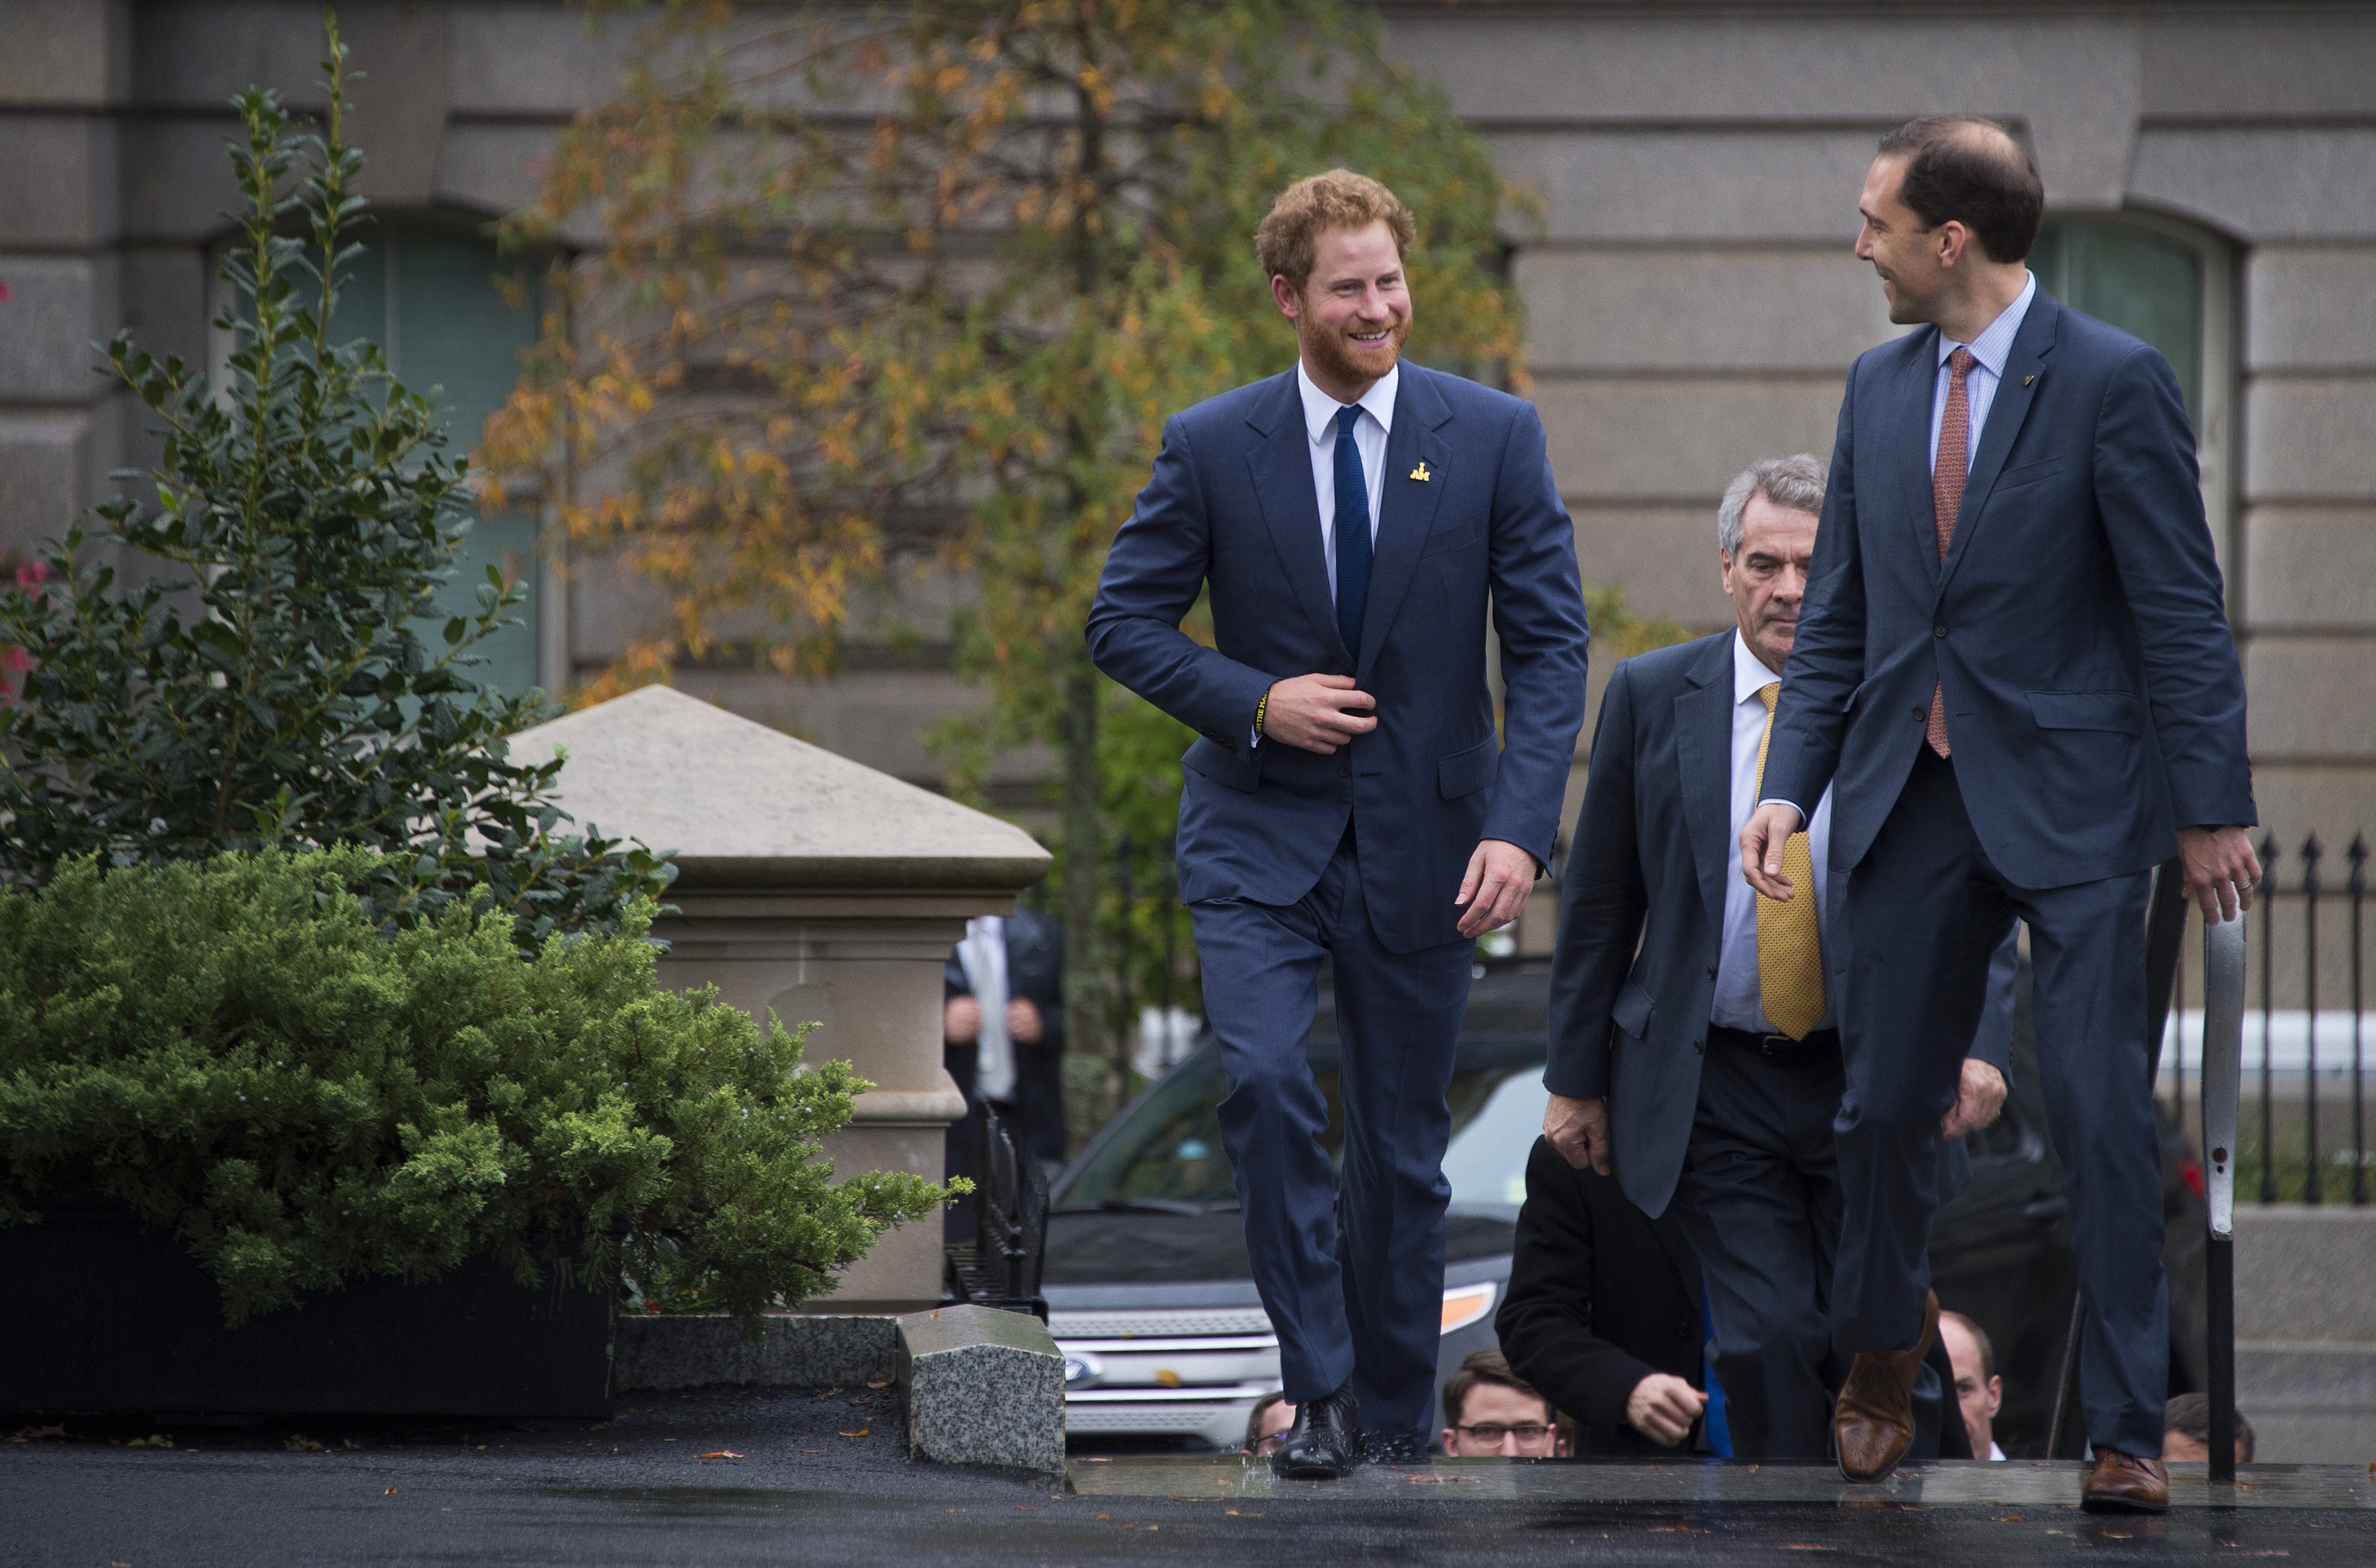 Prince Harry on his way to the White House to meet with former President of the United States Barack Obama in Washington, DC on October 28, 2015 | Source: Getty Images